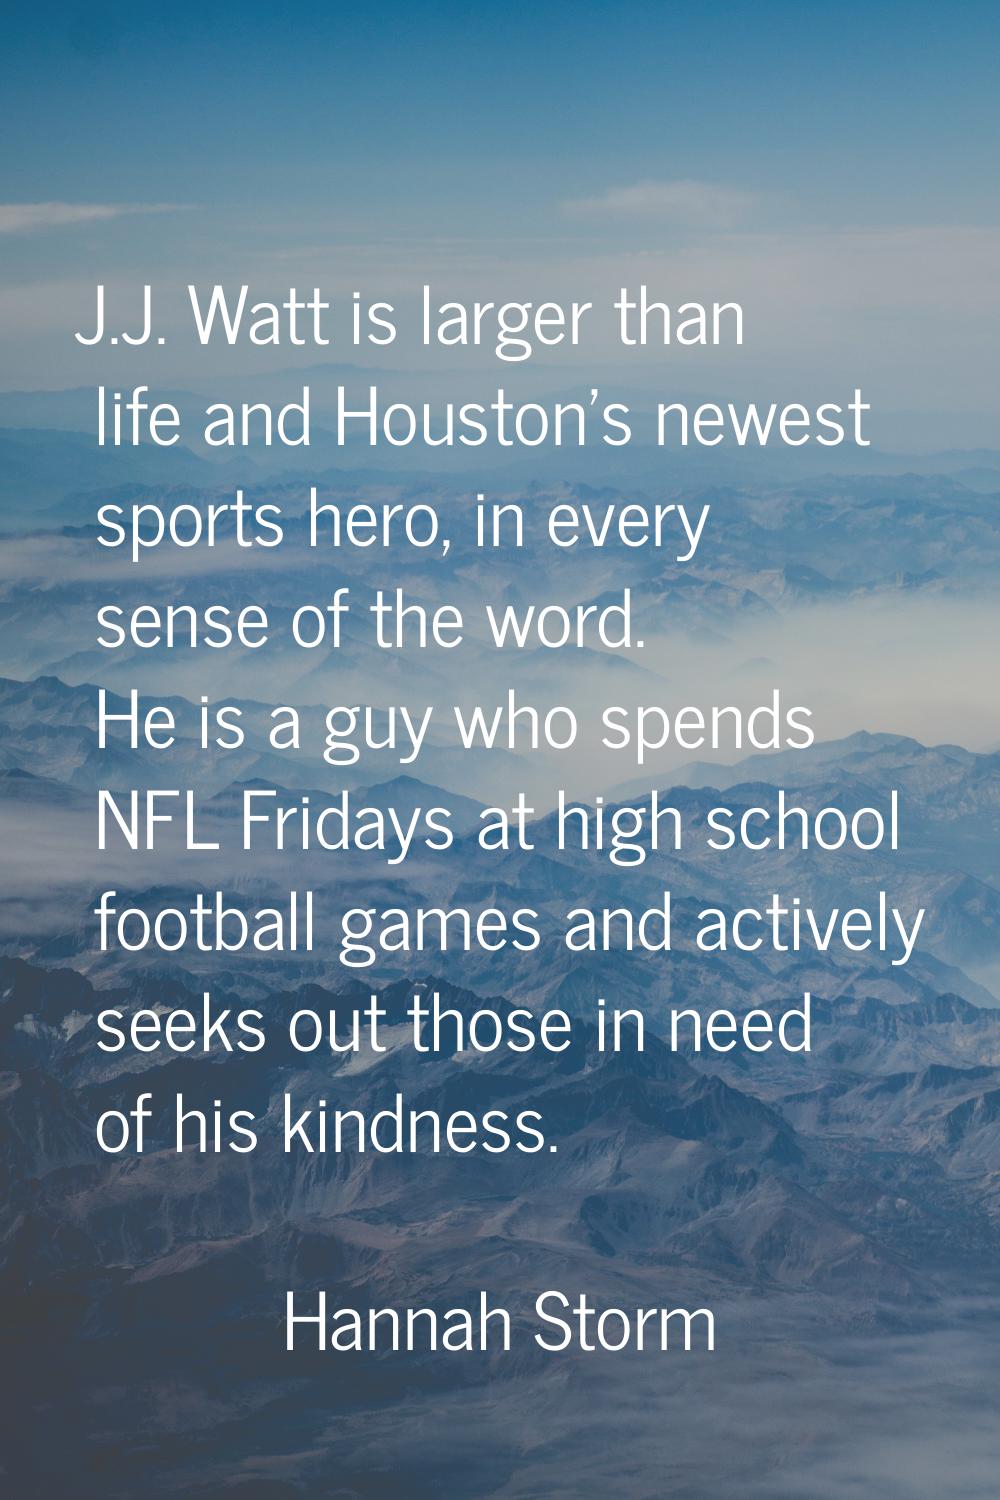 J.J. Watt is larger than life and Houston's newest sports hero, in every sense of the word. He is a